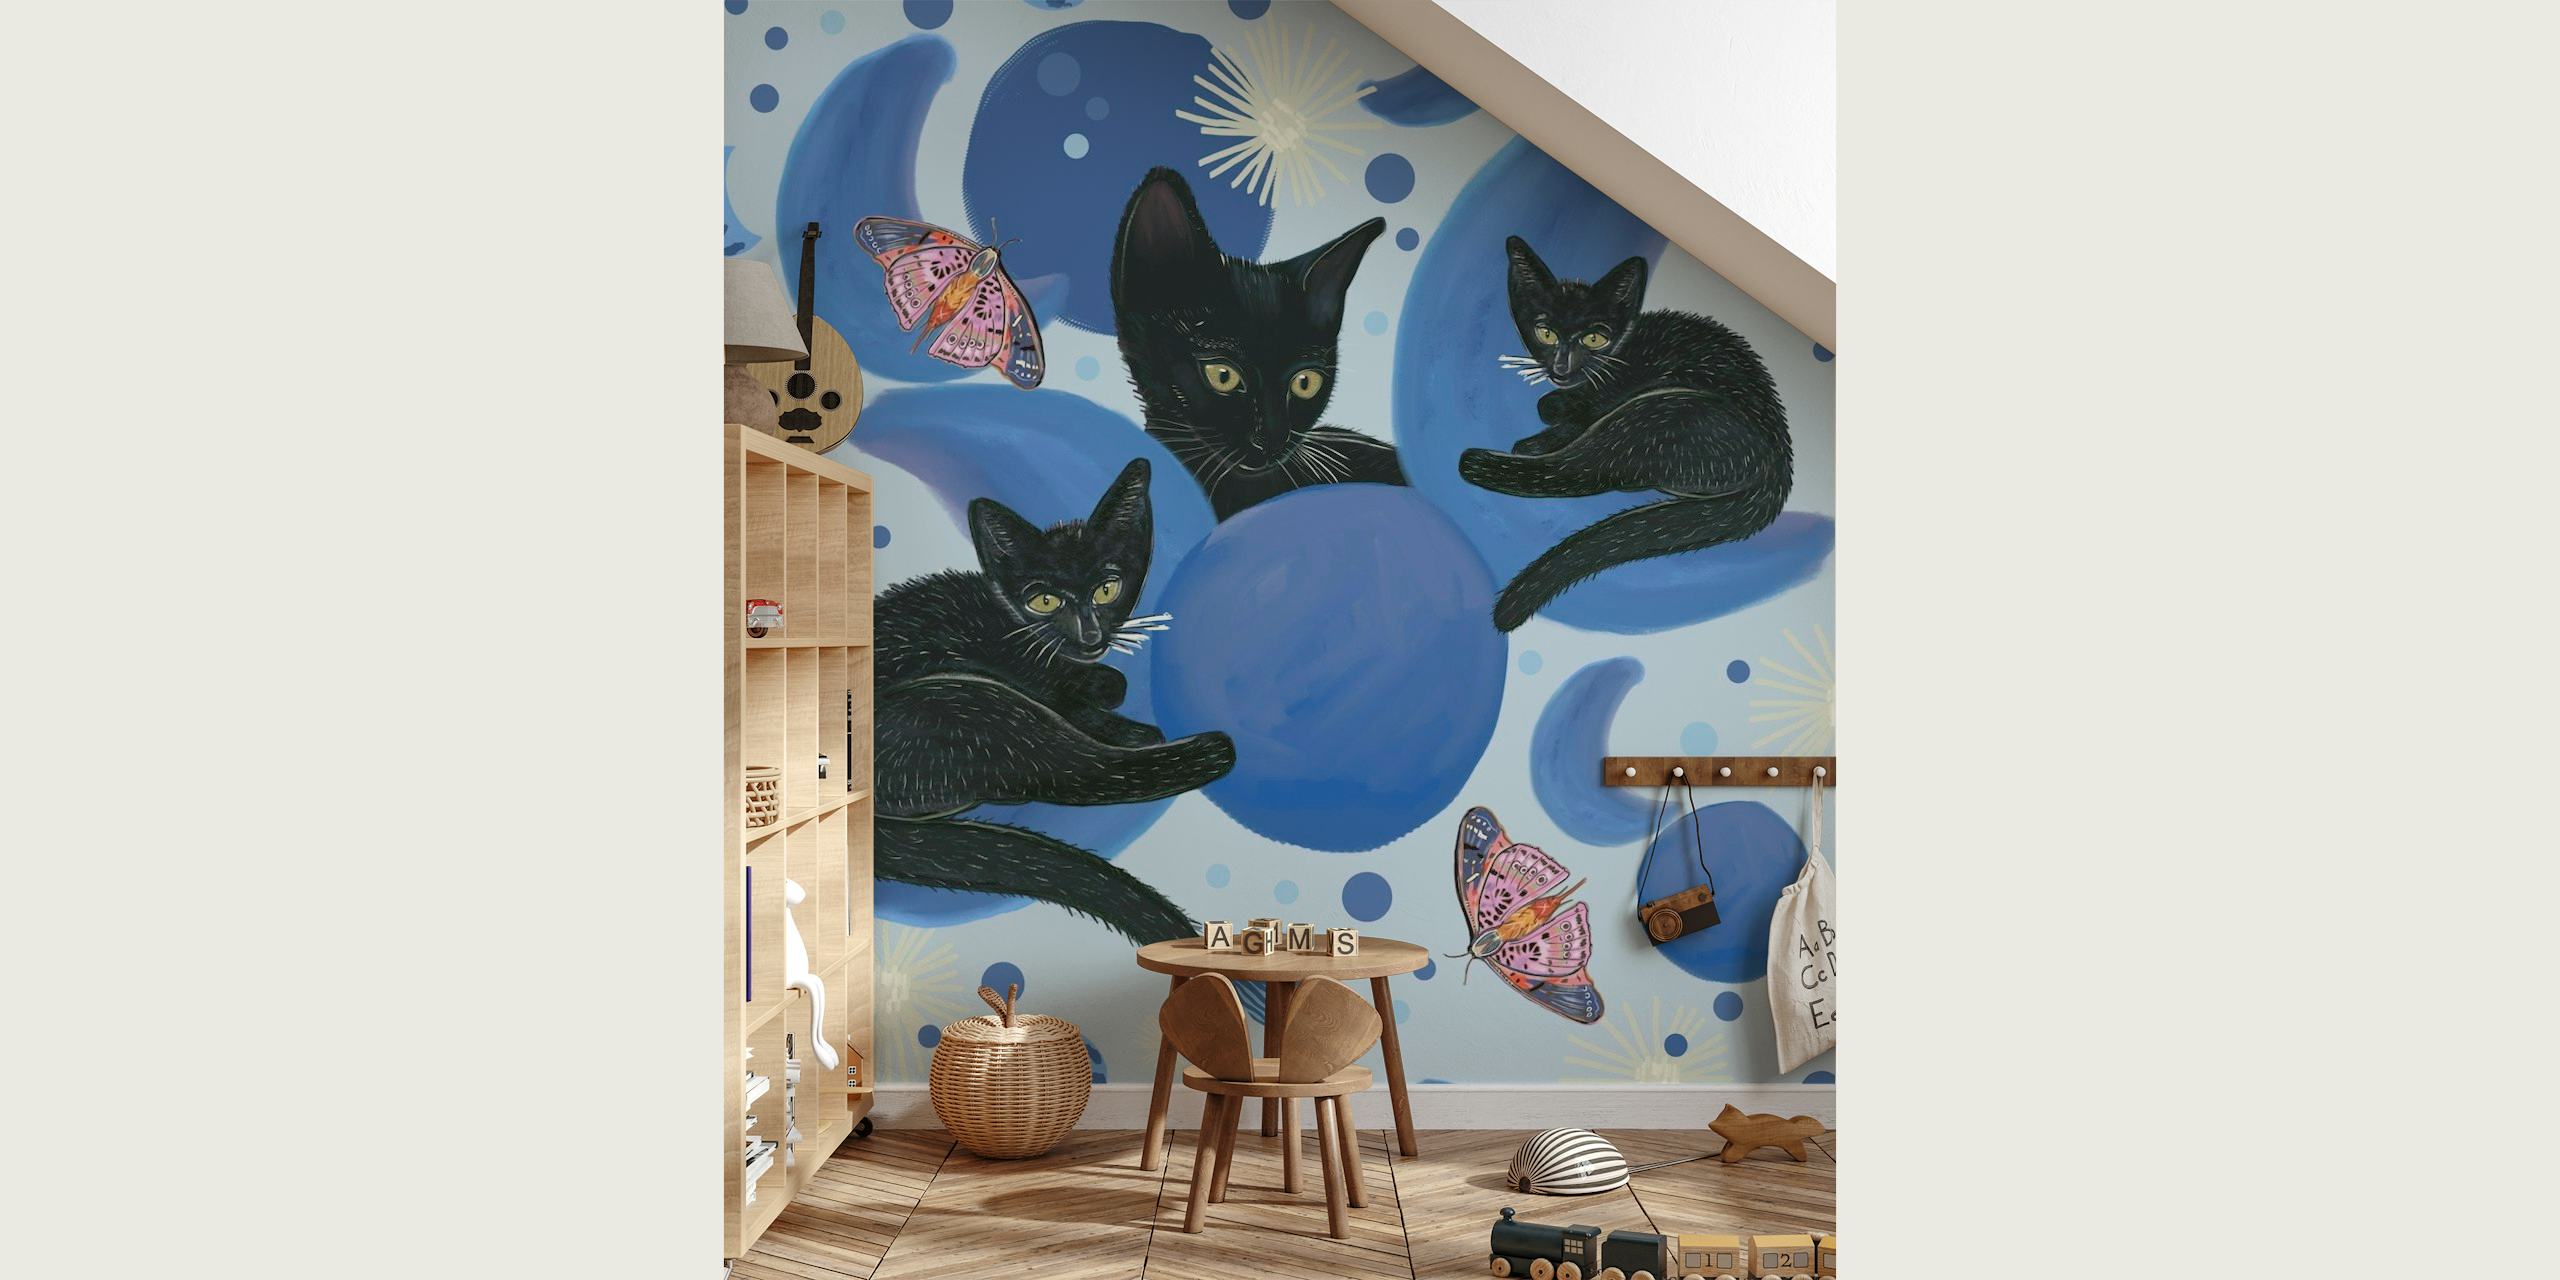 Black cats interspersed with moon phases and stars on a mural